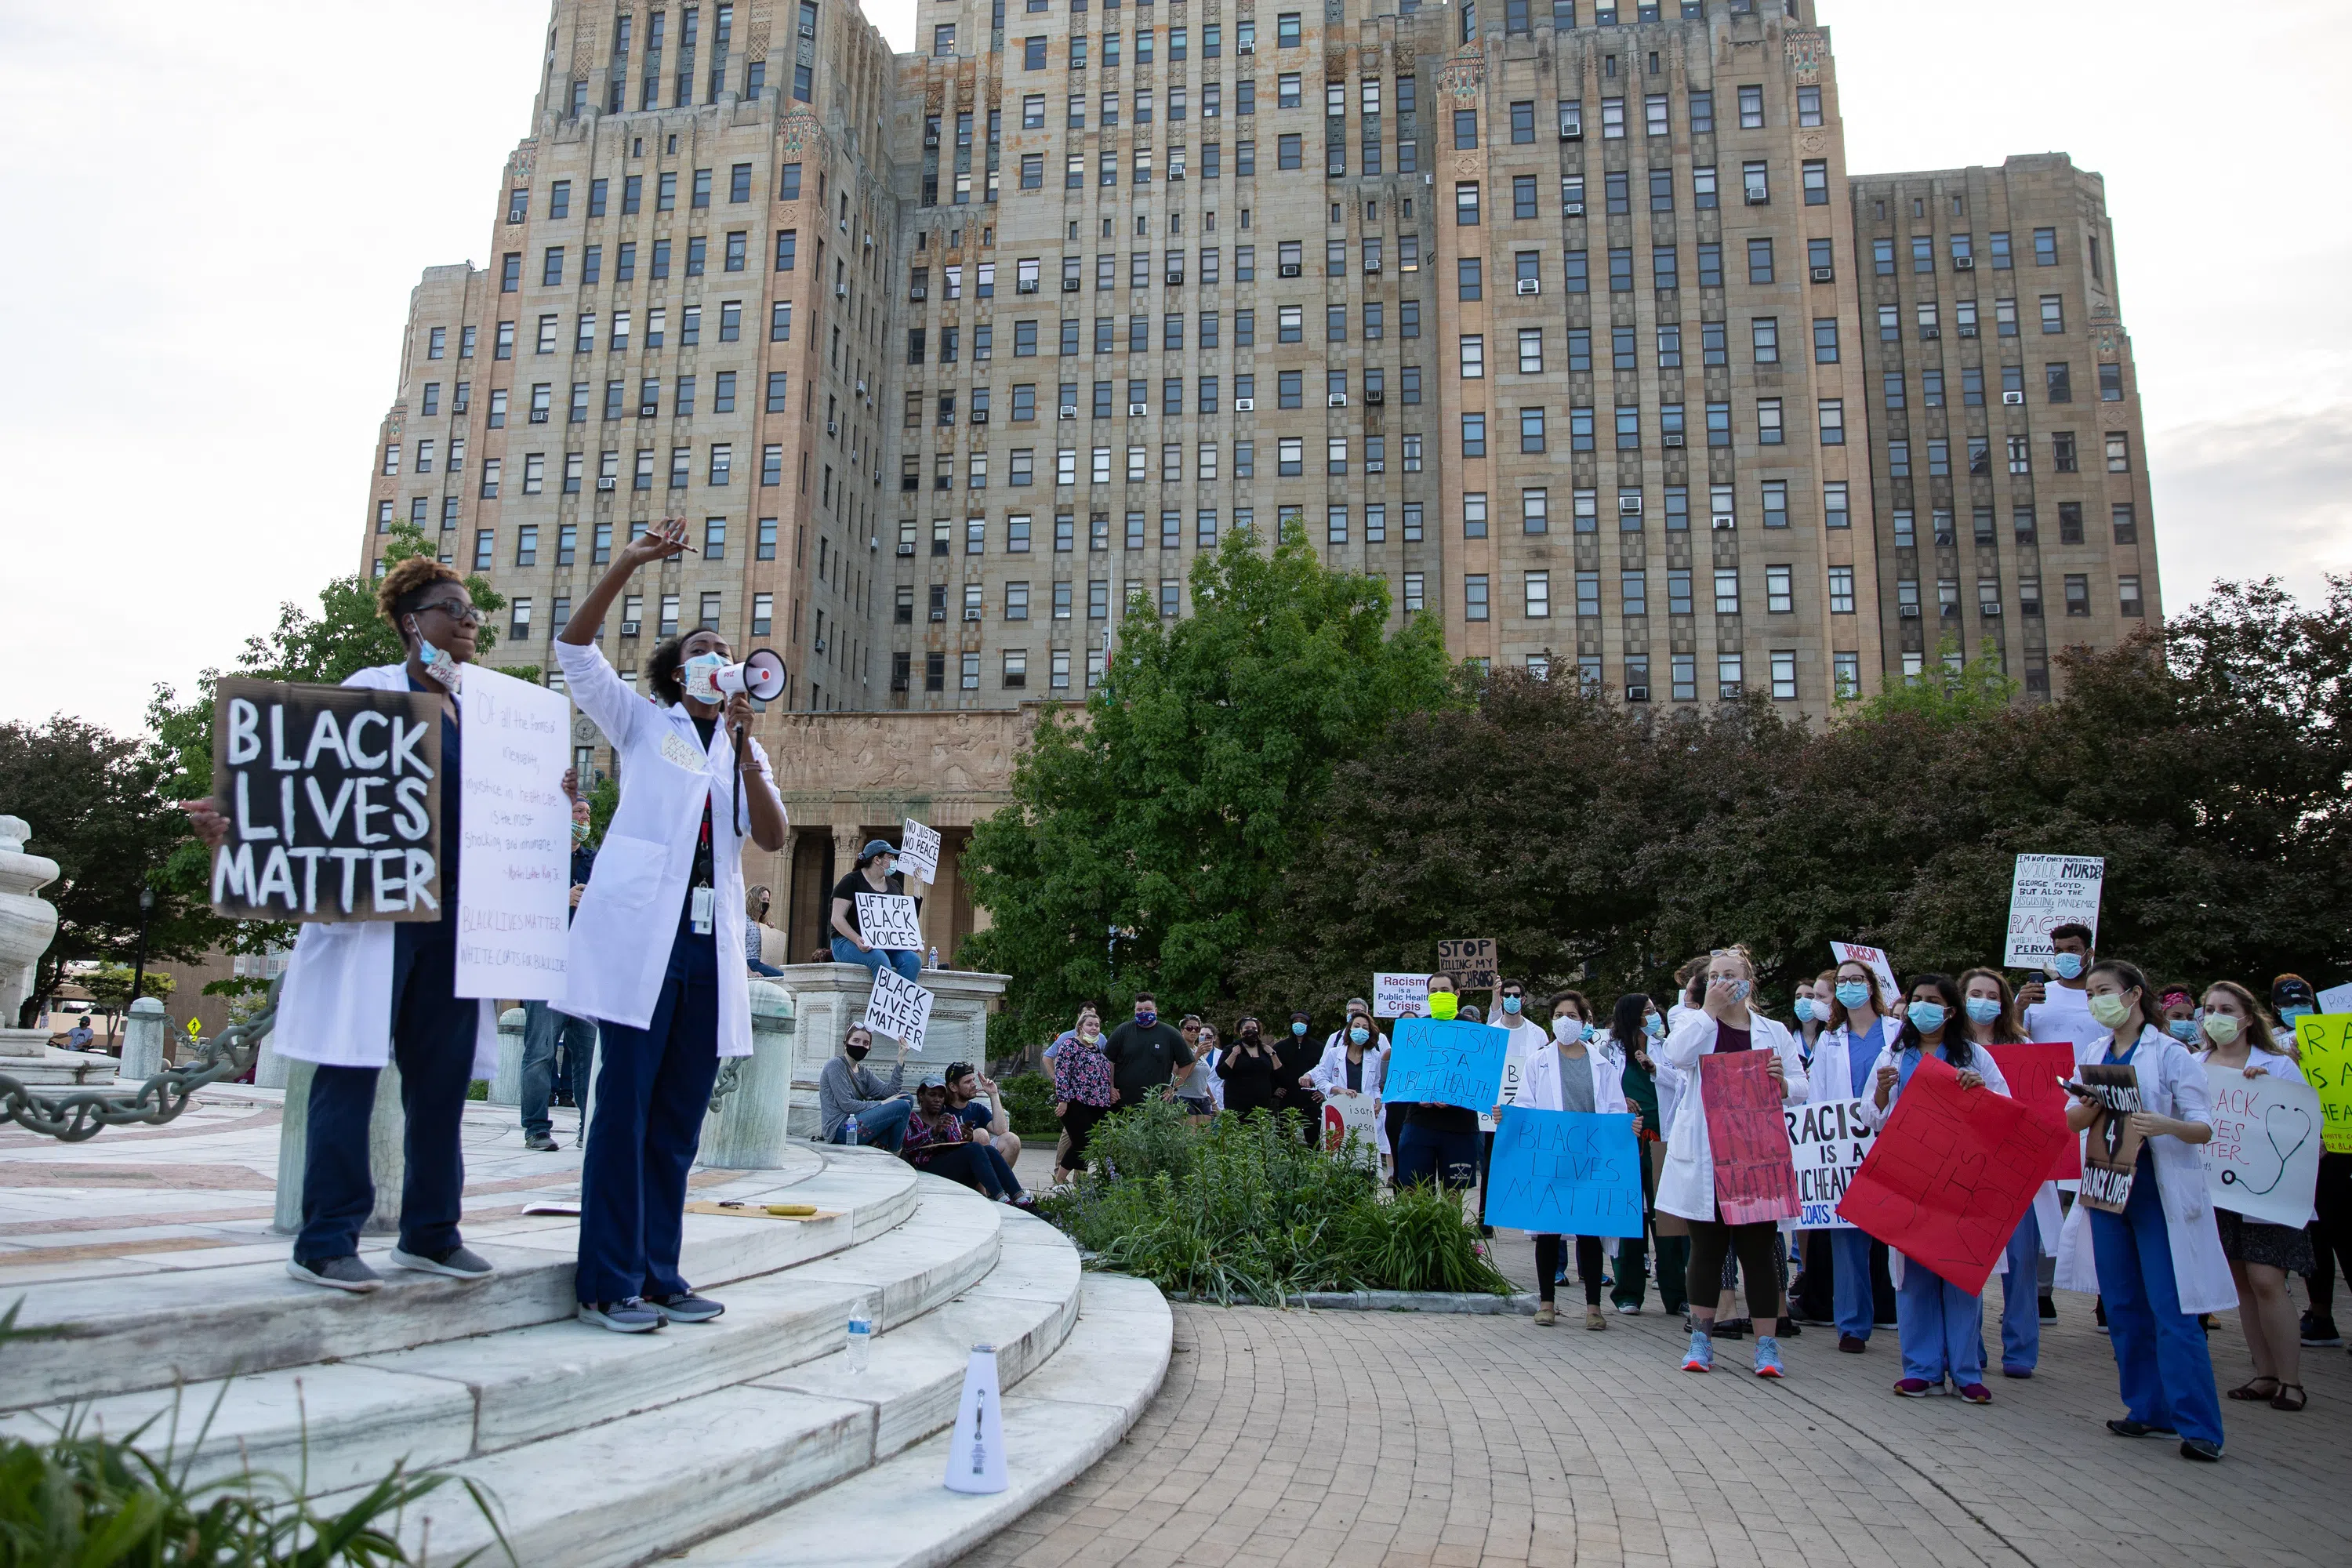 Faculty, students and others from the Jacobs School of Medicine and Biomedical Sciences took part in a "White Coats 4 Black Lives" march.